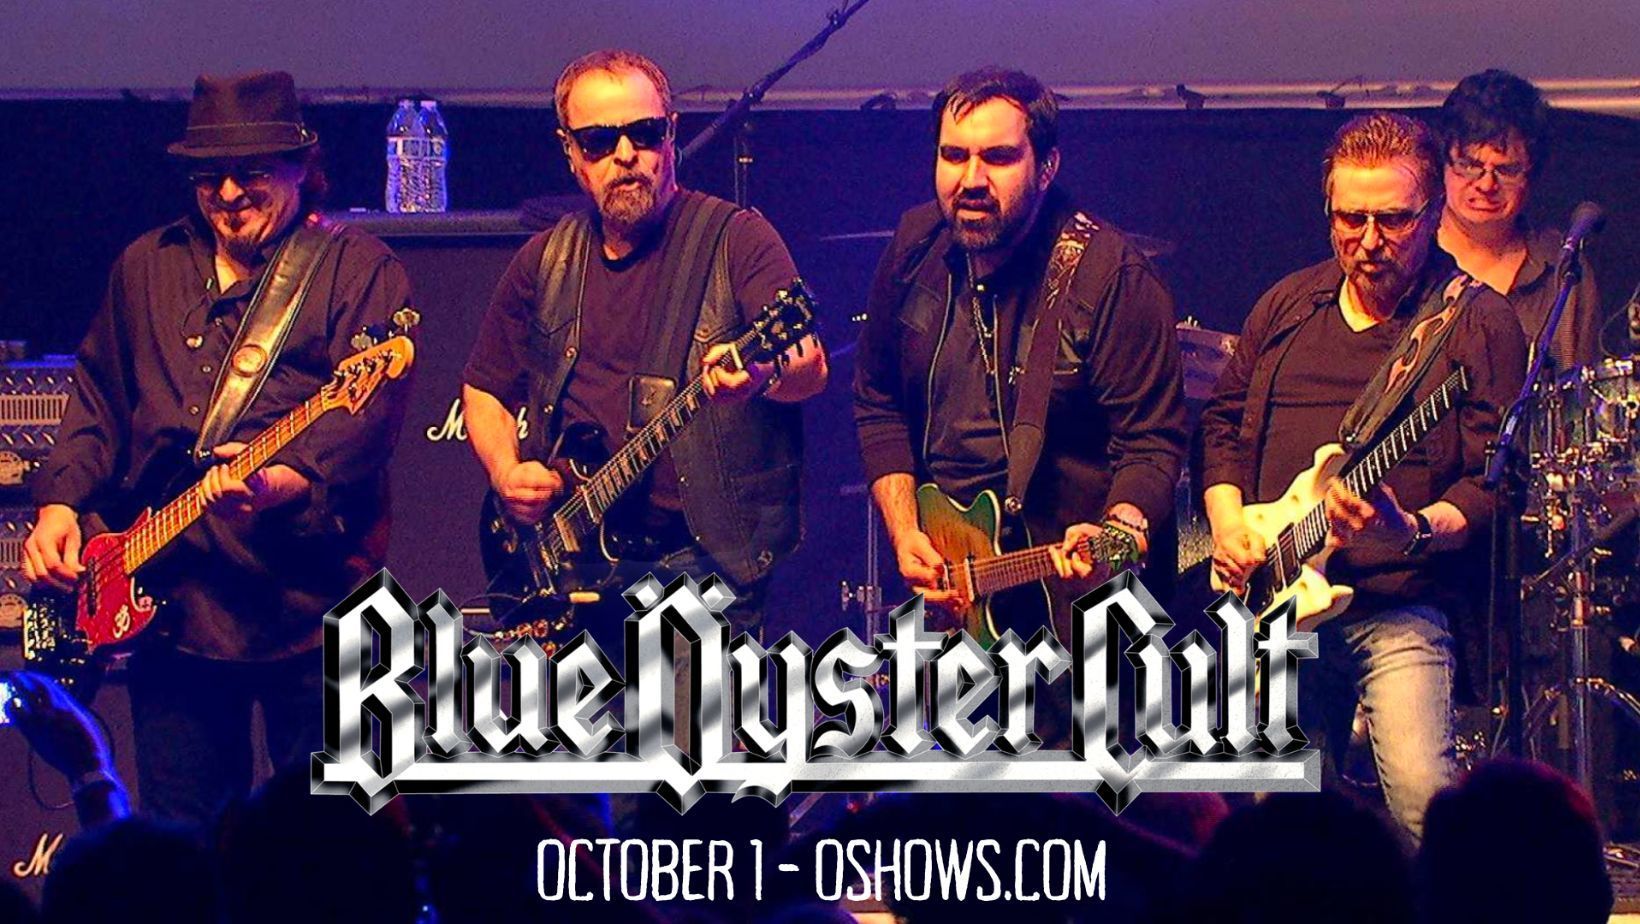 Blue Oyster Cult at Arcada Theatre, St. Charles, IL. October 1st, St. Charles, Illinois, United States